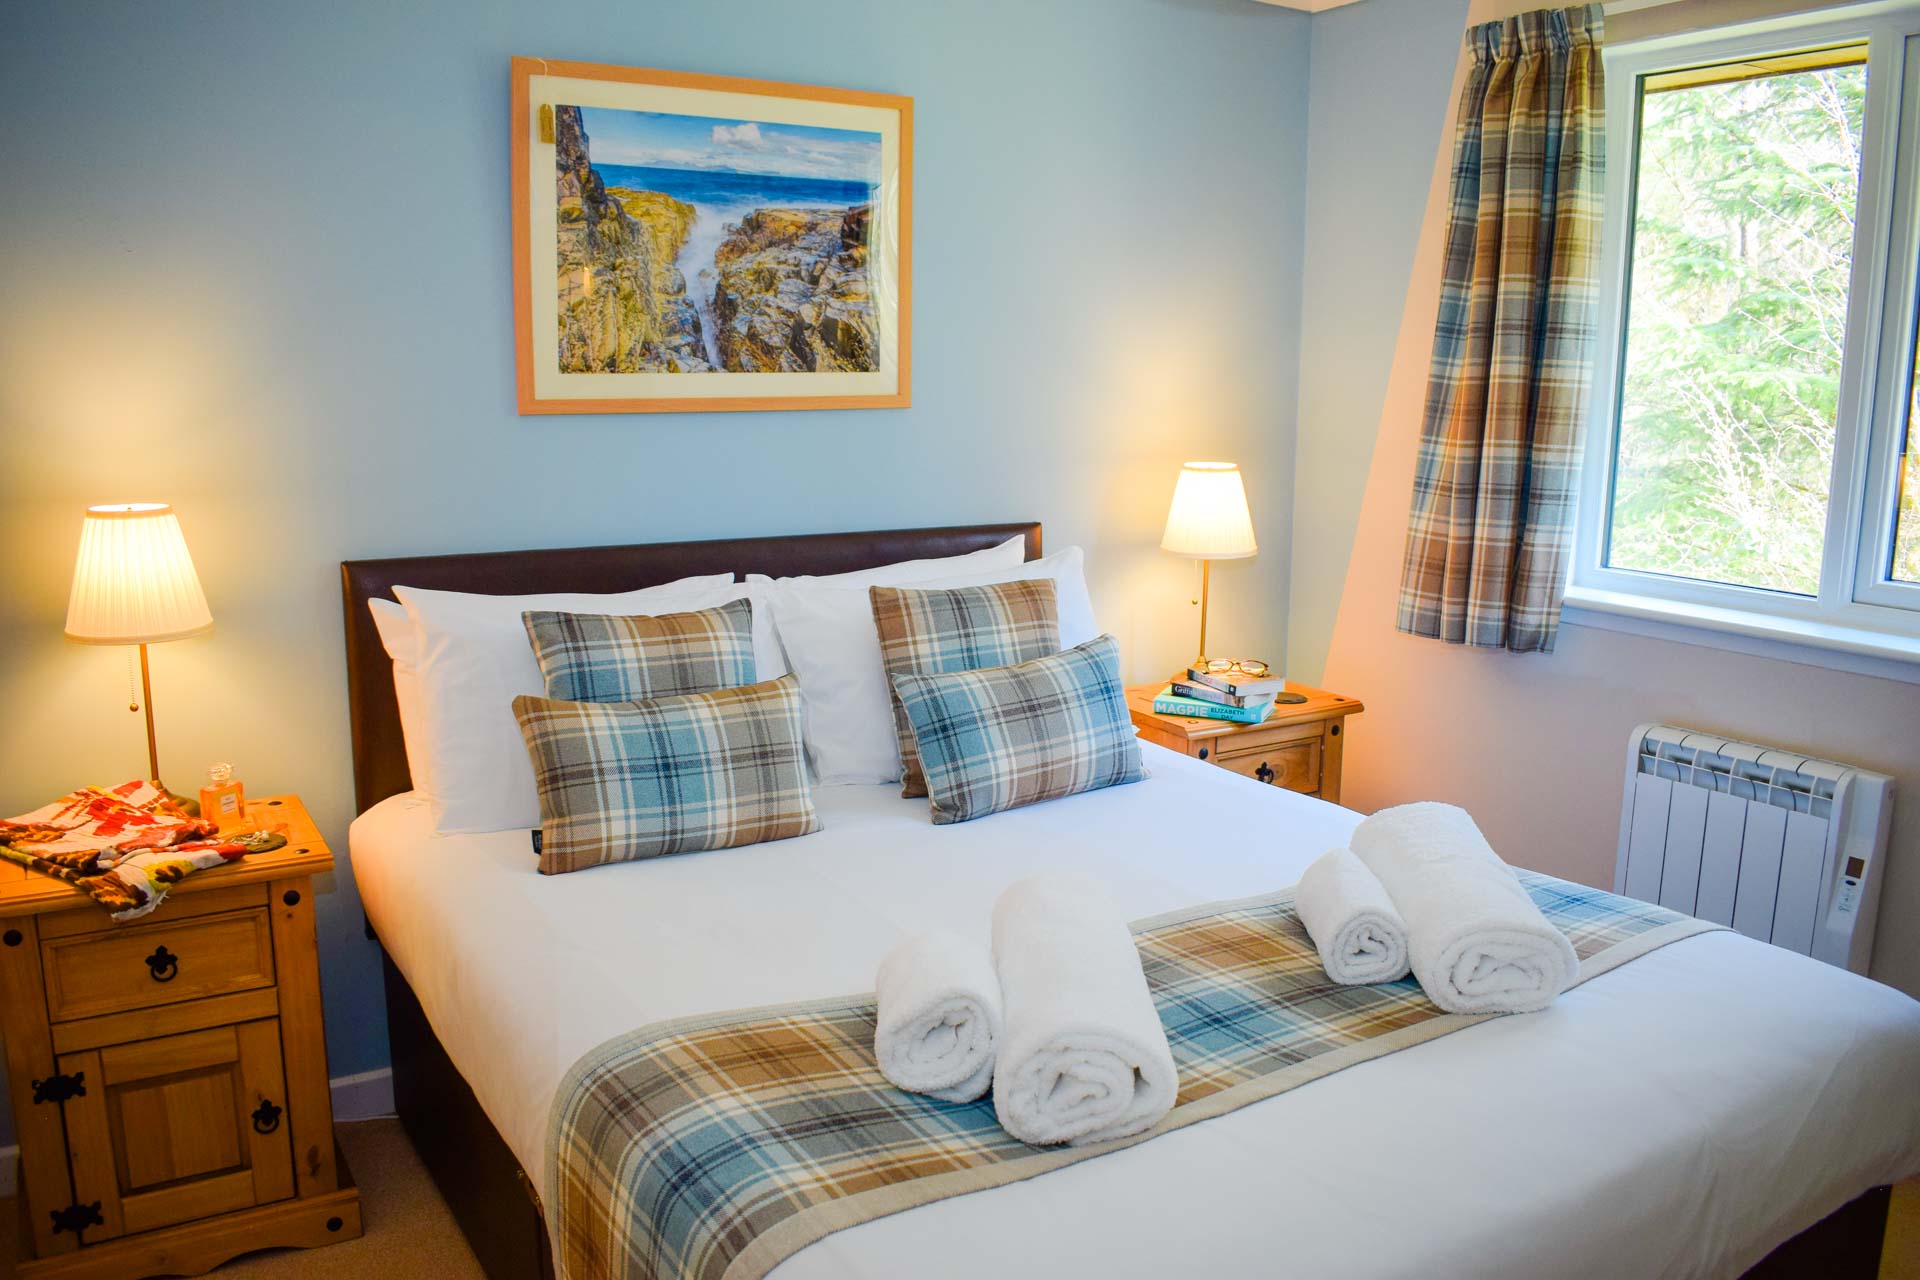 Spacious Luxury Lodges sleeping 6 guests near Fort William in the Highlands of Scotland